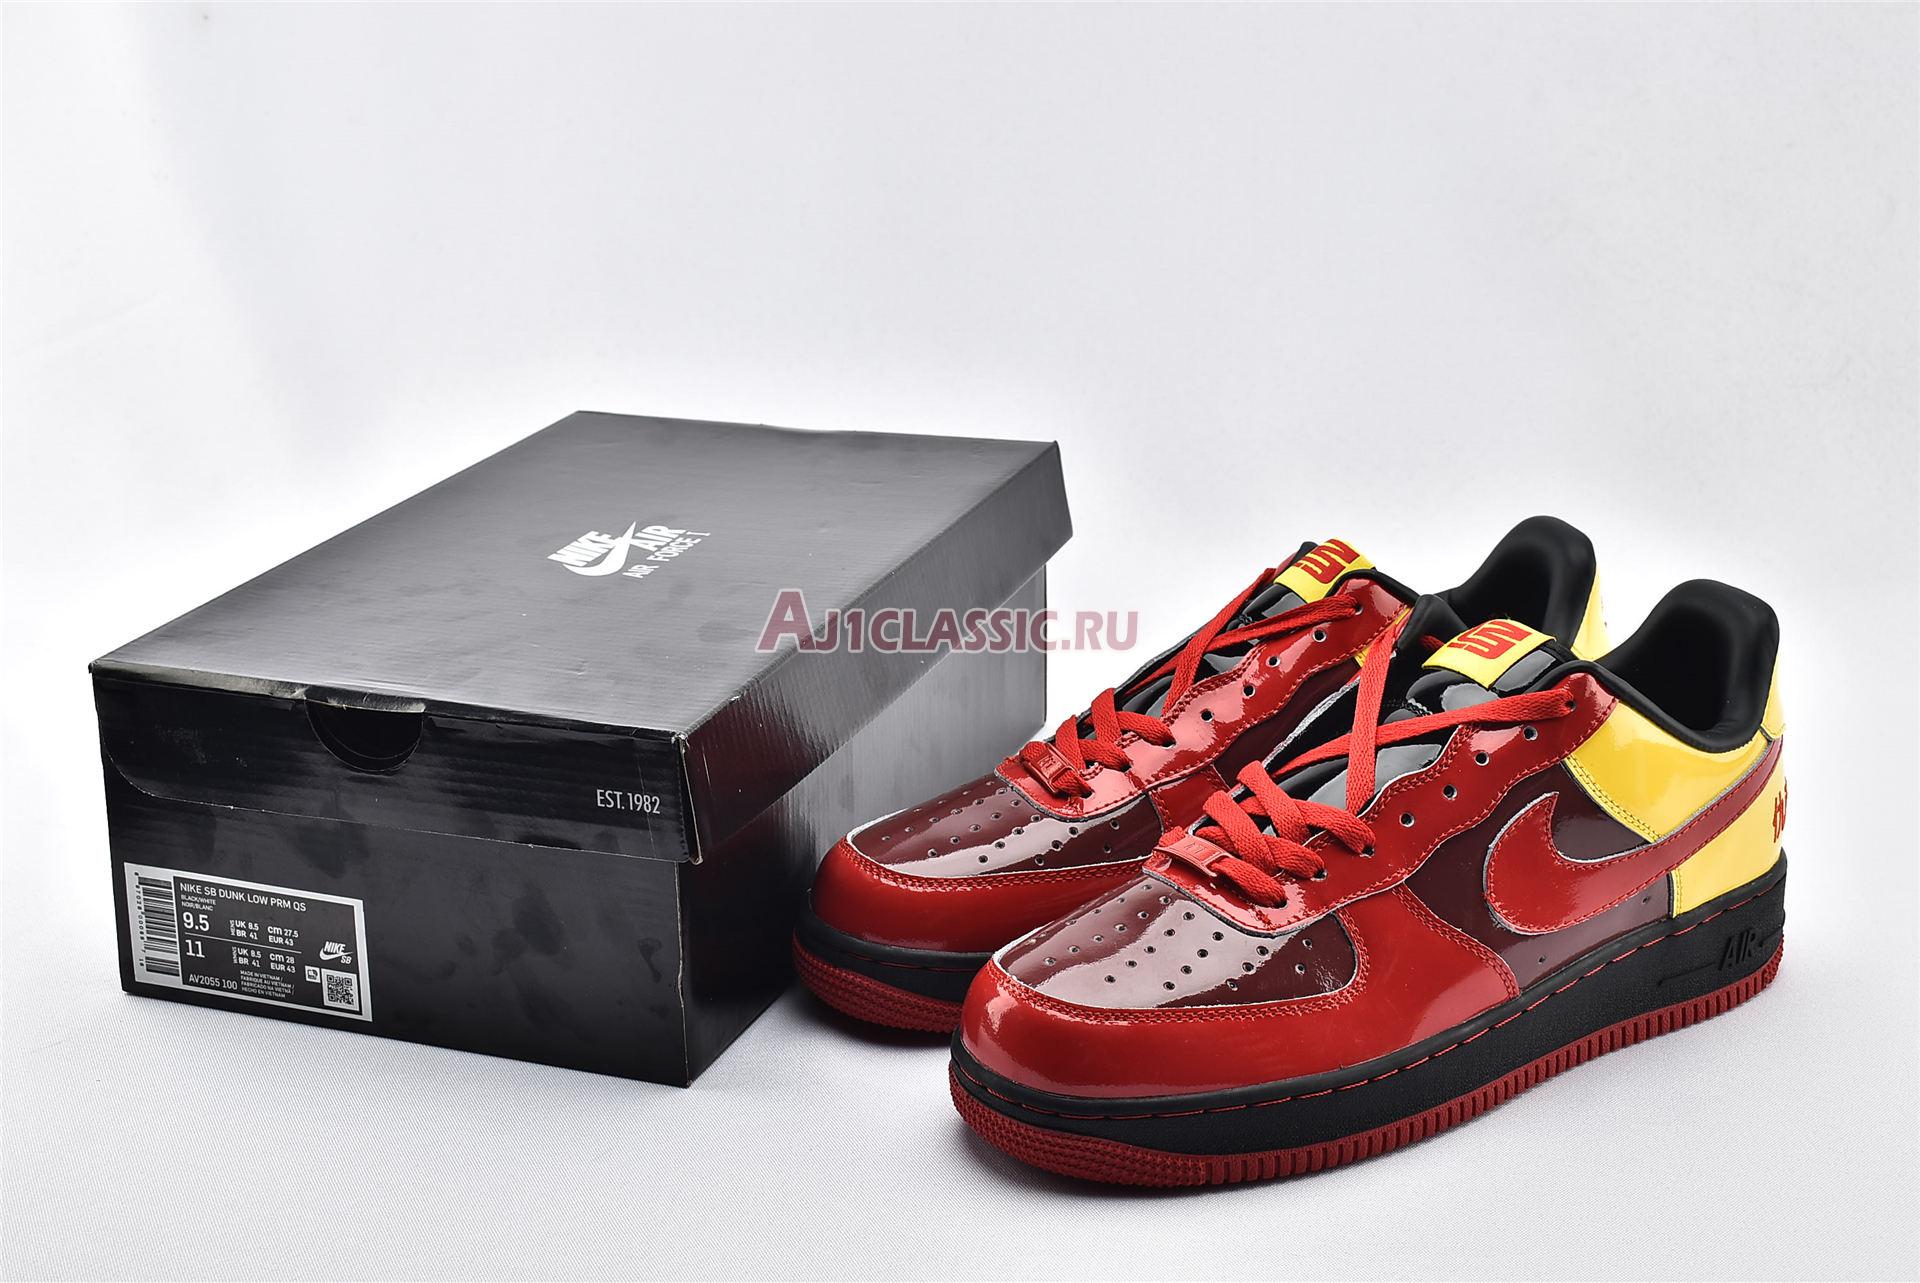 Nike Air Force 1 Chamber Of Fear Hater AV2052-600 Redwood/Varsity Red-Taxi-Black Sneakers